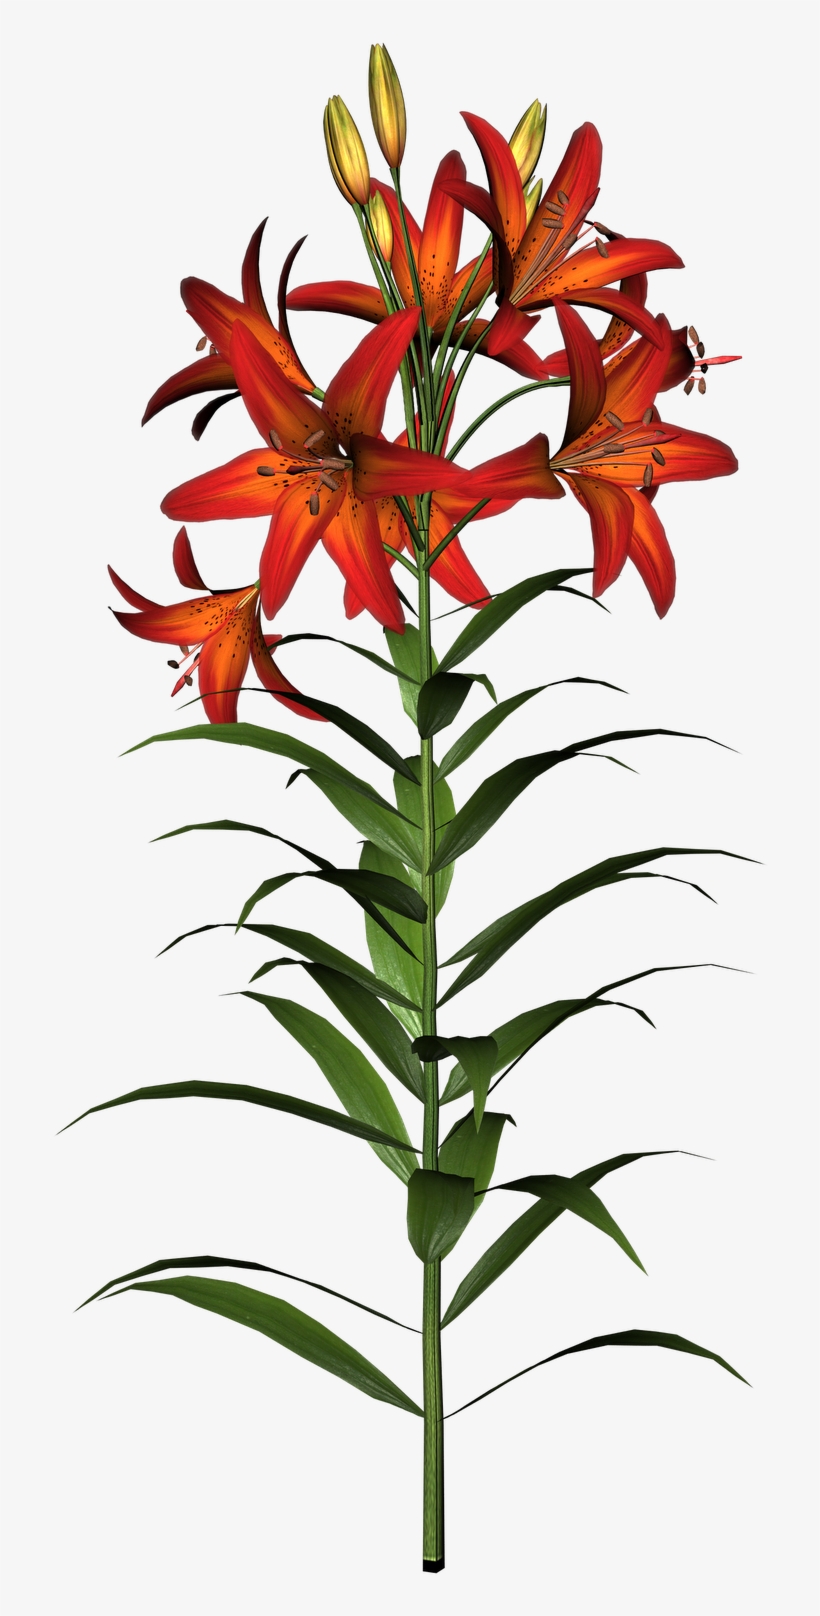 Easter Lily Clipart - Tiger Lily Flower And Stem, transparent png #1003222